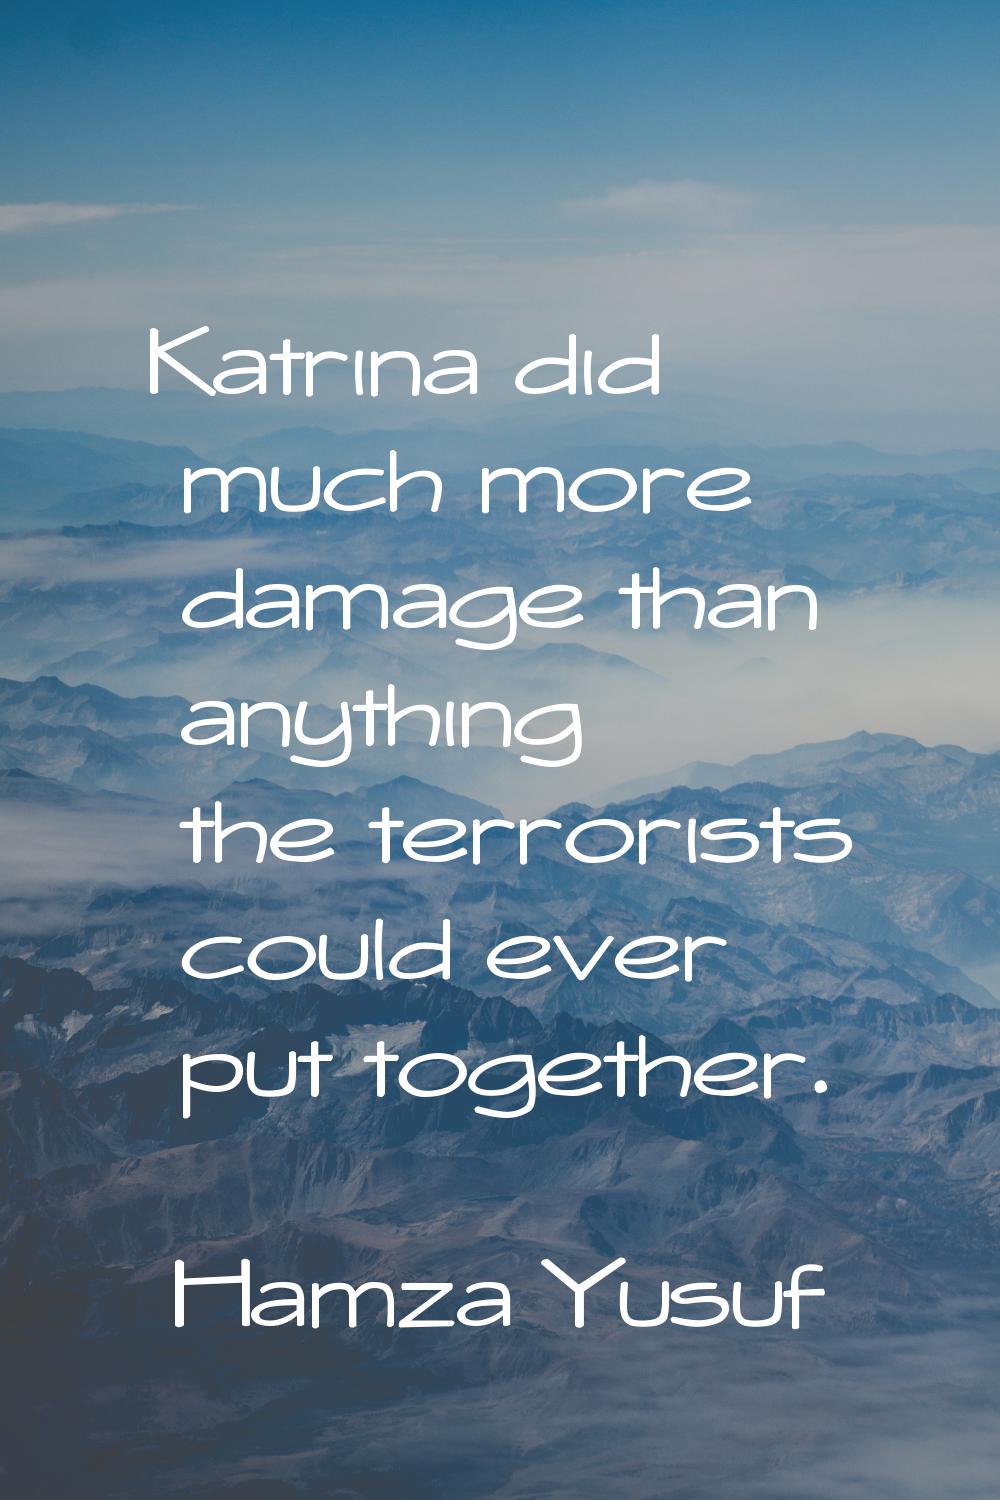 Katrina did much more damage than anything the terrorists could ever put together.